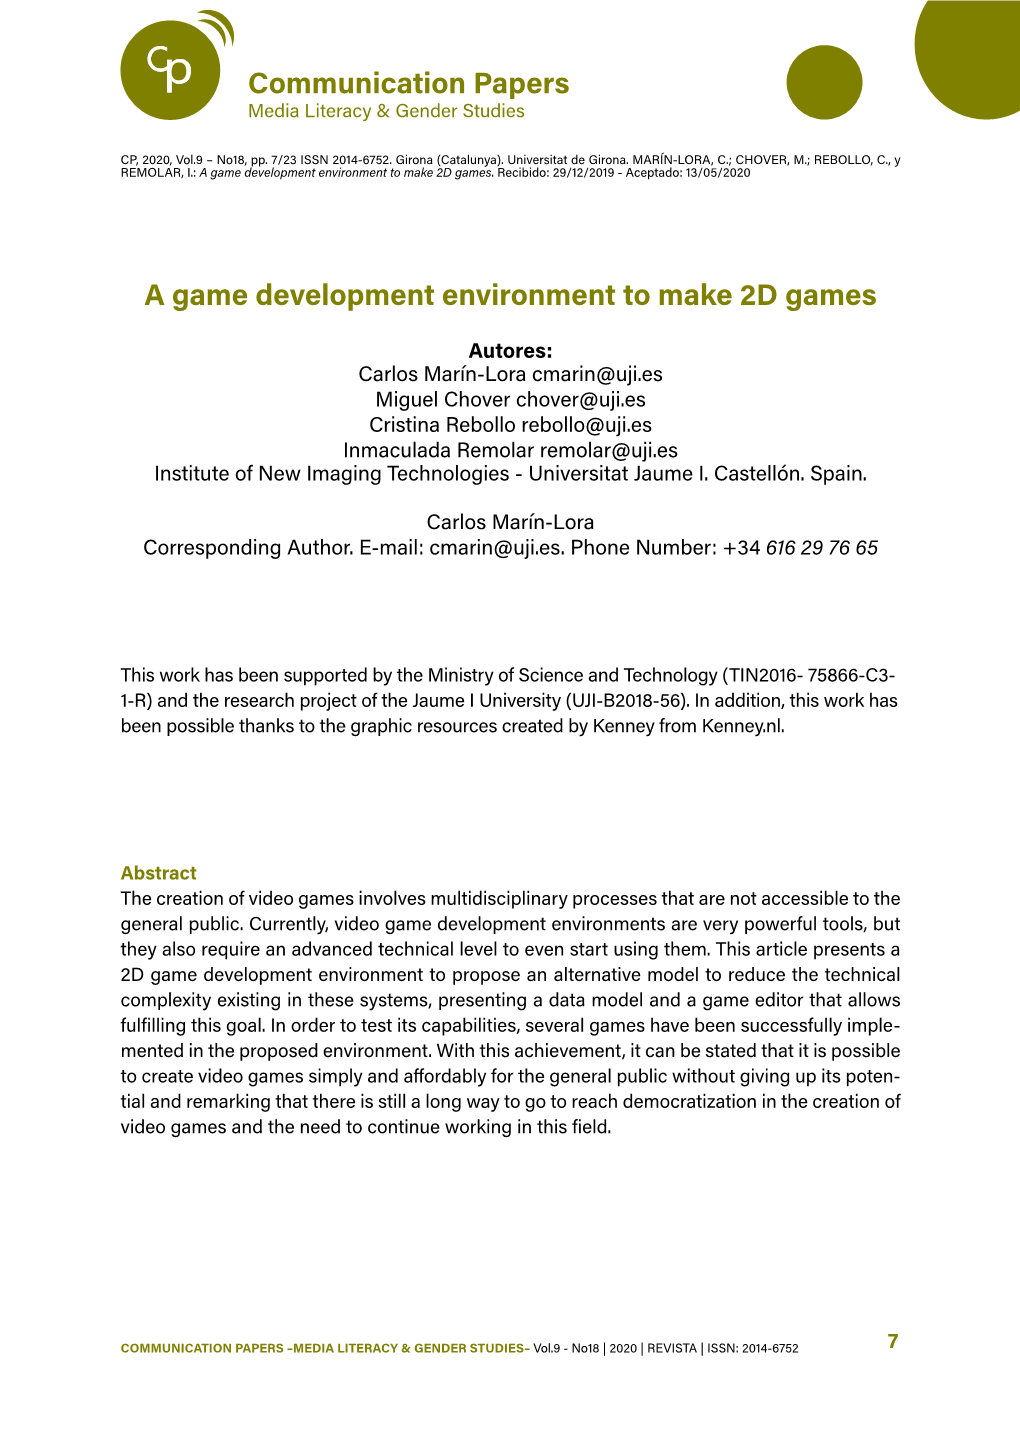 Communication Papers a Game Development Environment to Make 2D Games